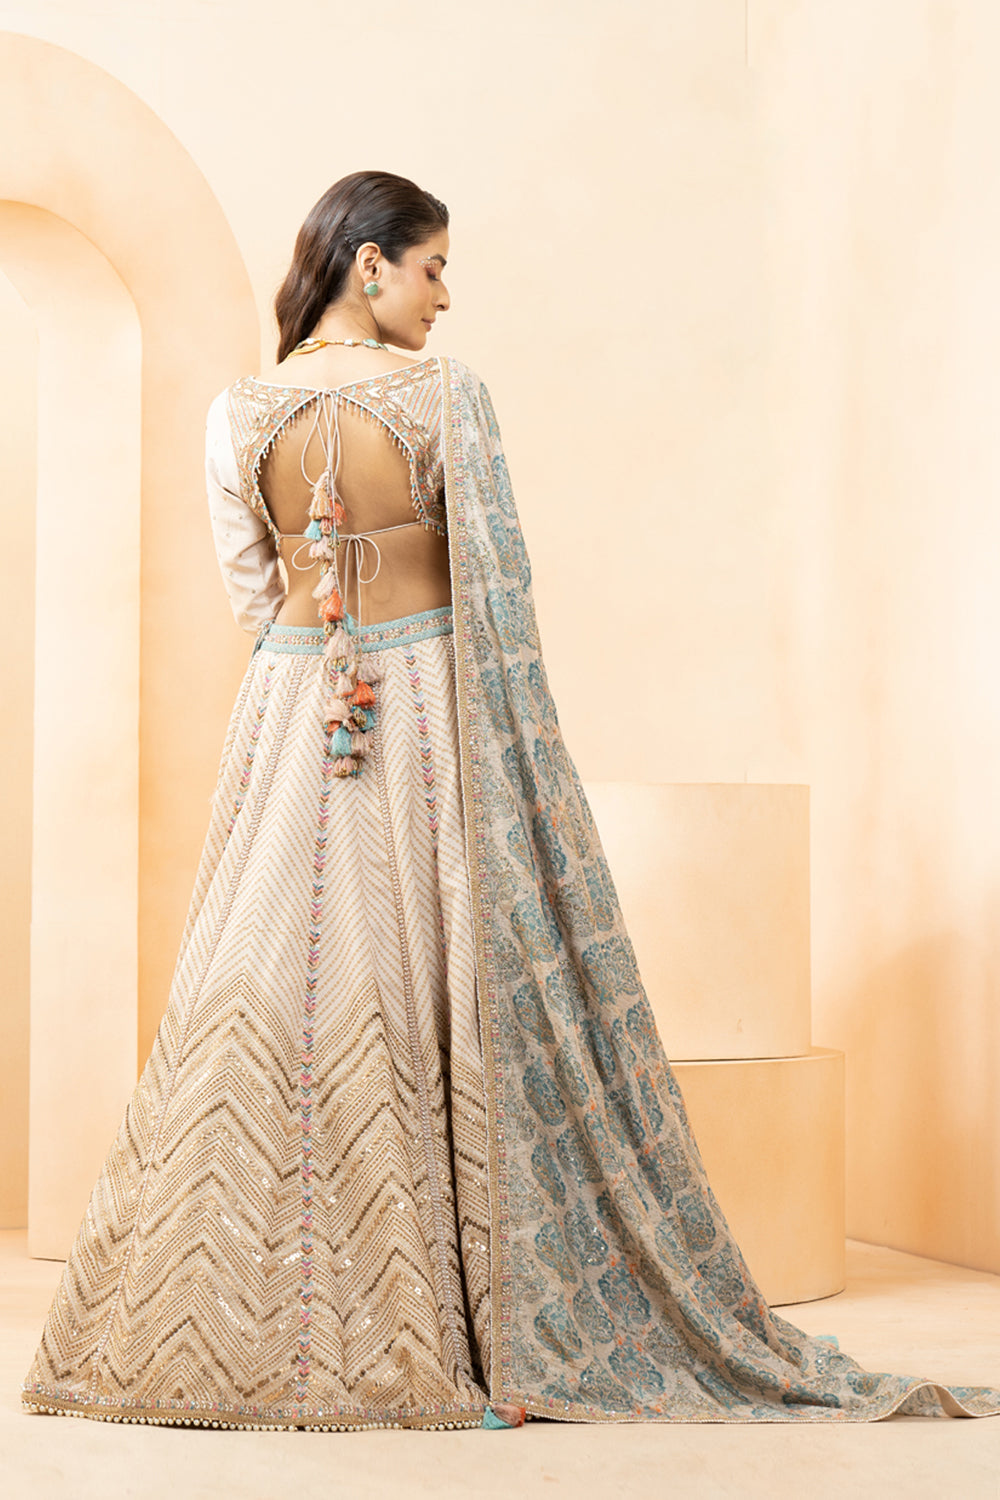 Premium Photo | Timeless Indian Beauty in a Classic Lehenga Choli with  Ornate Jewelry Perfectly Suited for Cultural